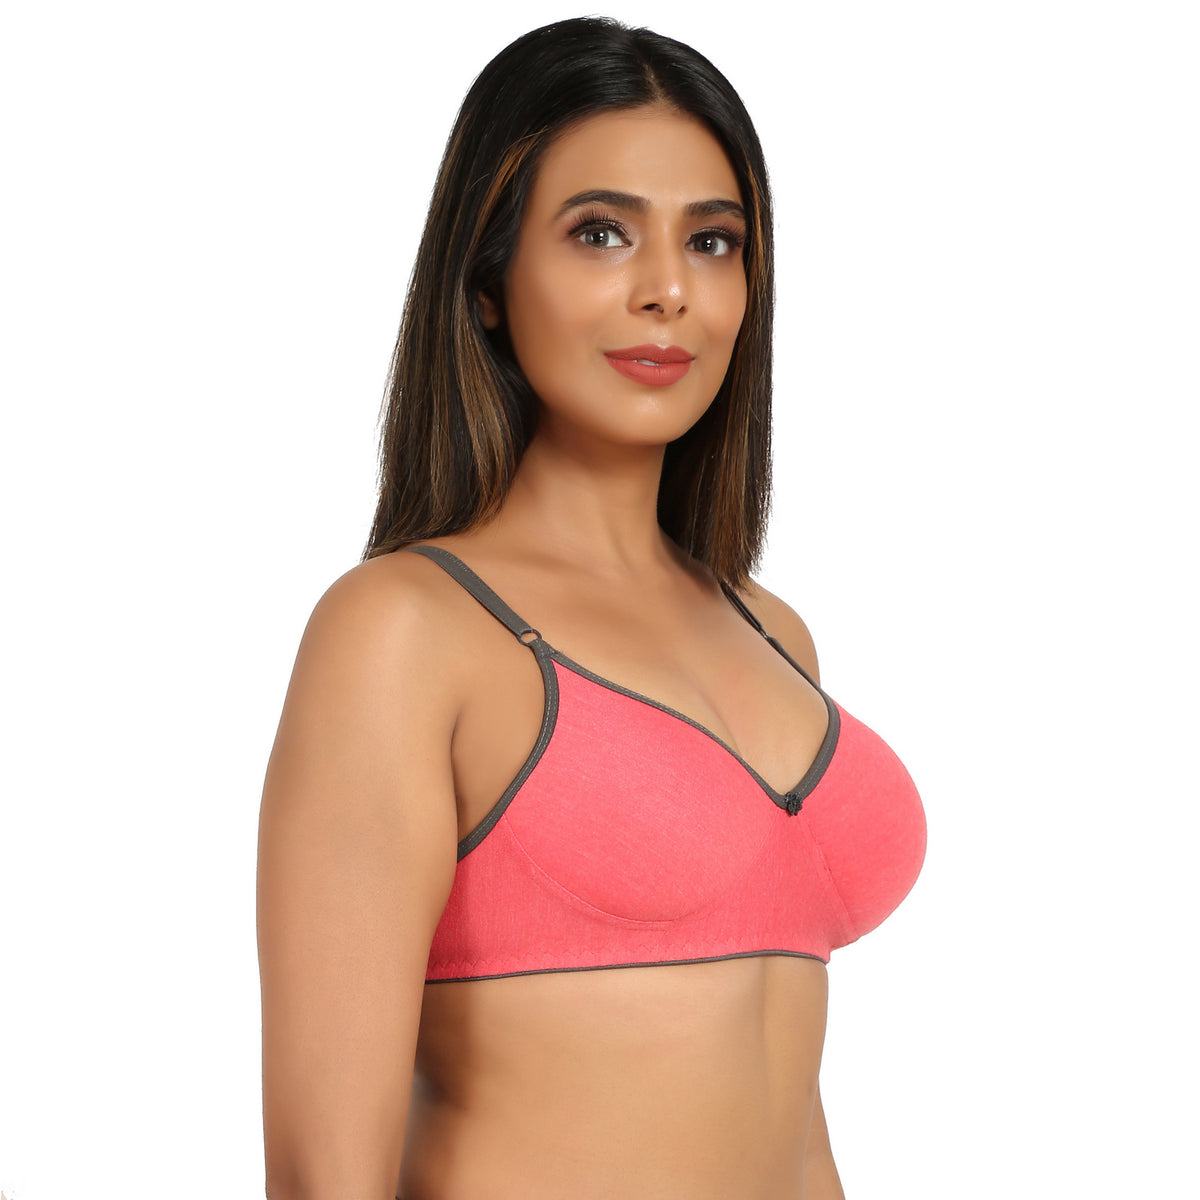 Bruchi club Women Lightly Padded Bra with 3/4th coverage-Pink color